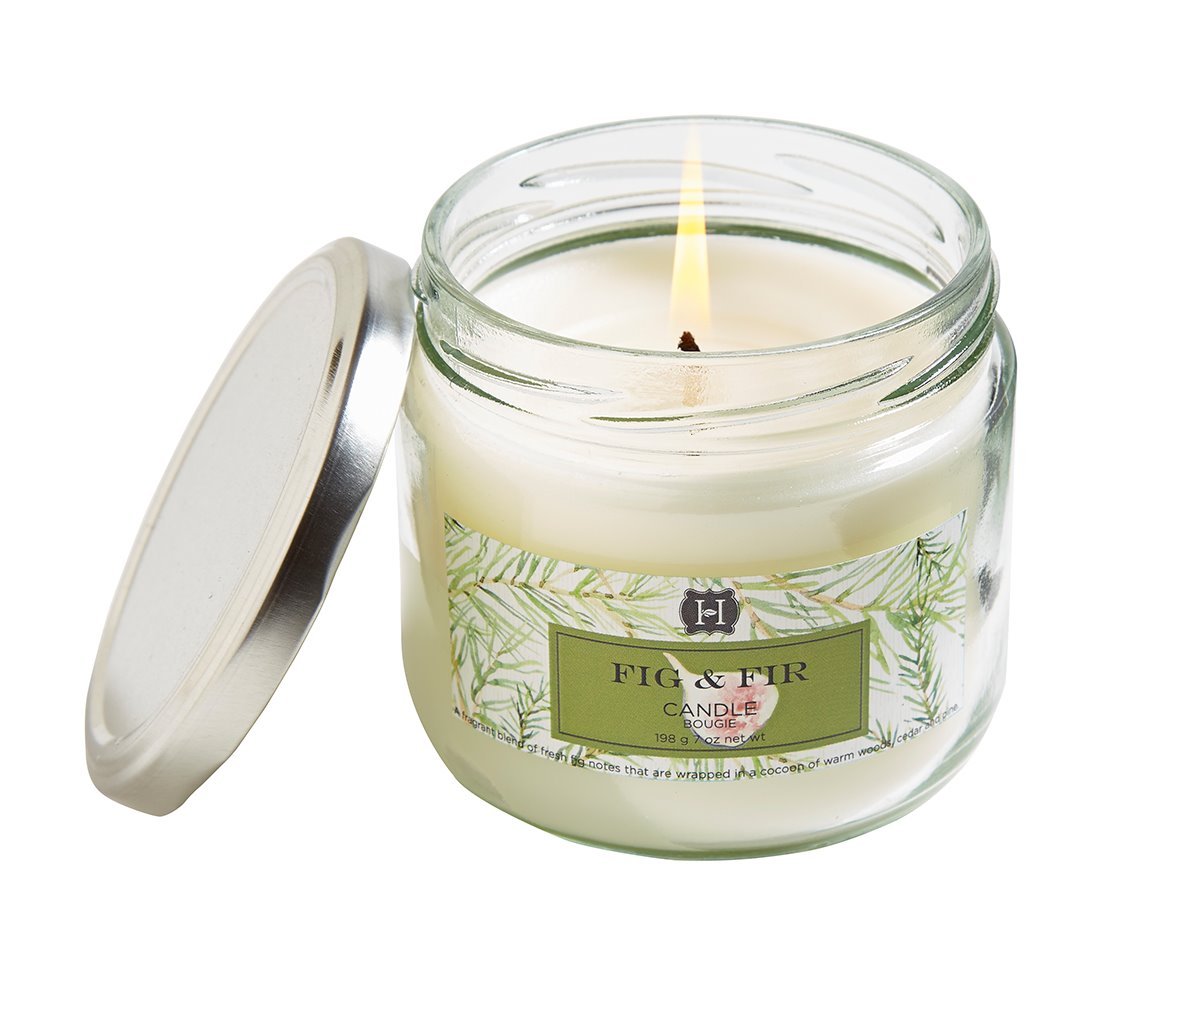 Twigs Candle in Green Jar Hillhouse Naturals 6 Ounces